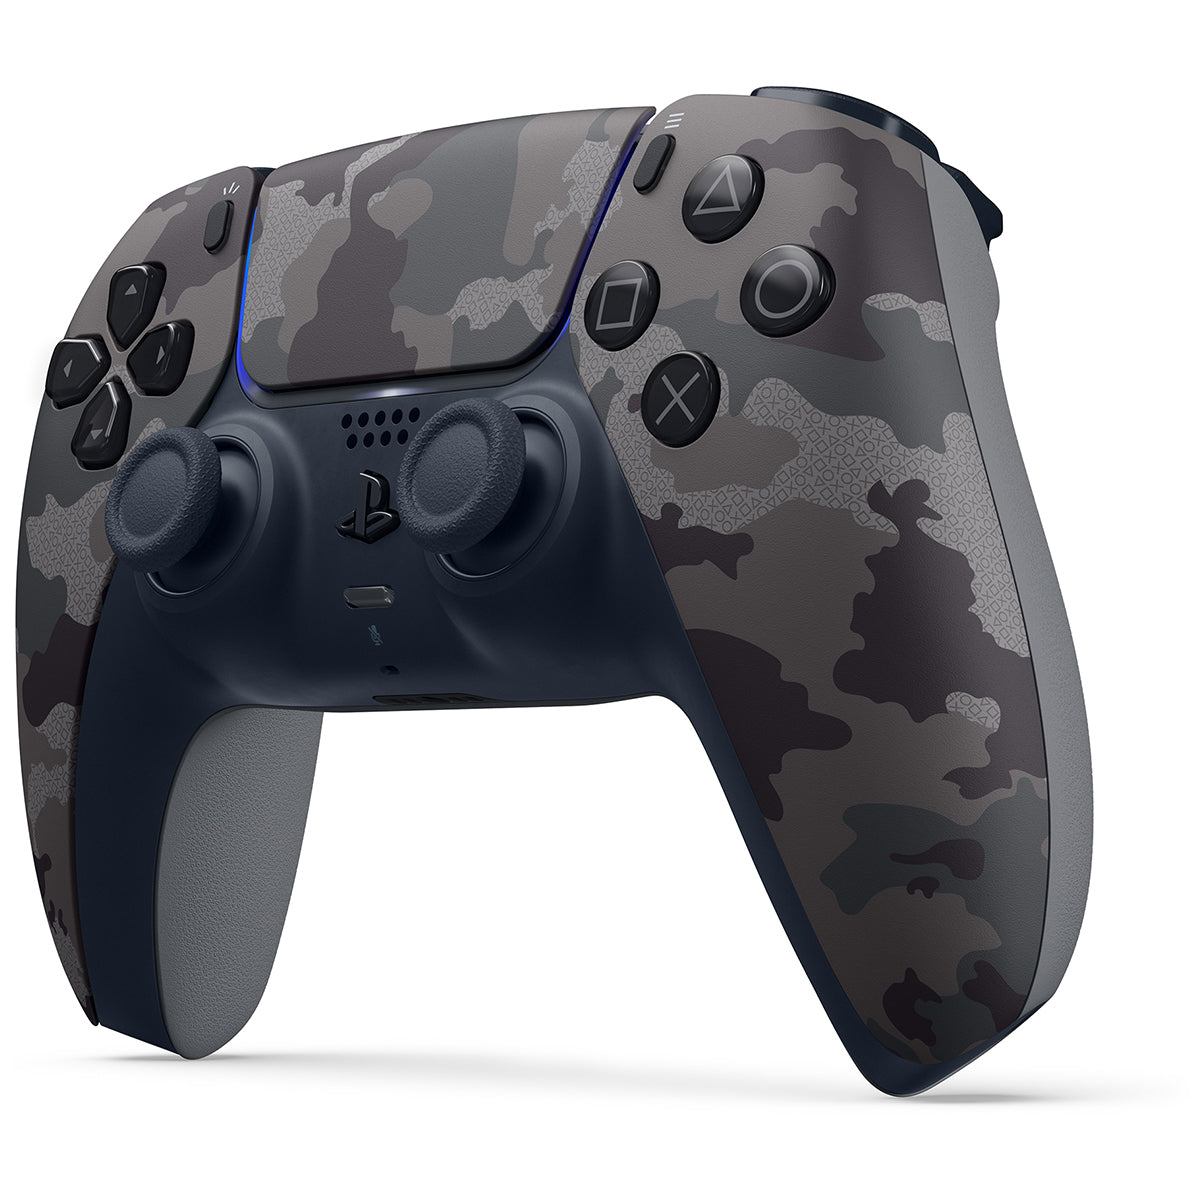 Sony Playstation 5 Digital Edition Bundle with Extra Gray Camo Controller, Black PULSE 3D Wireless Headset and Cleaning Cloth - Pro-Distributing